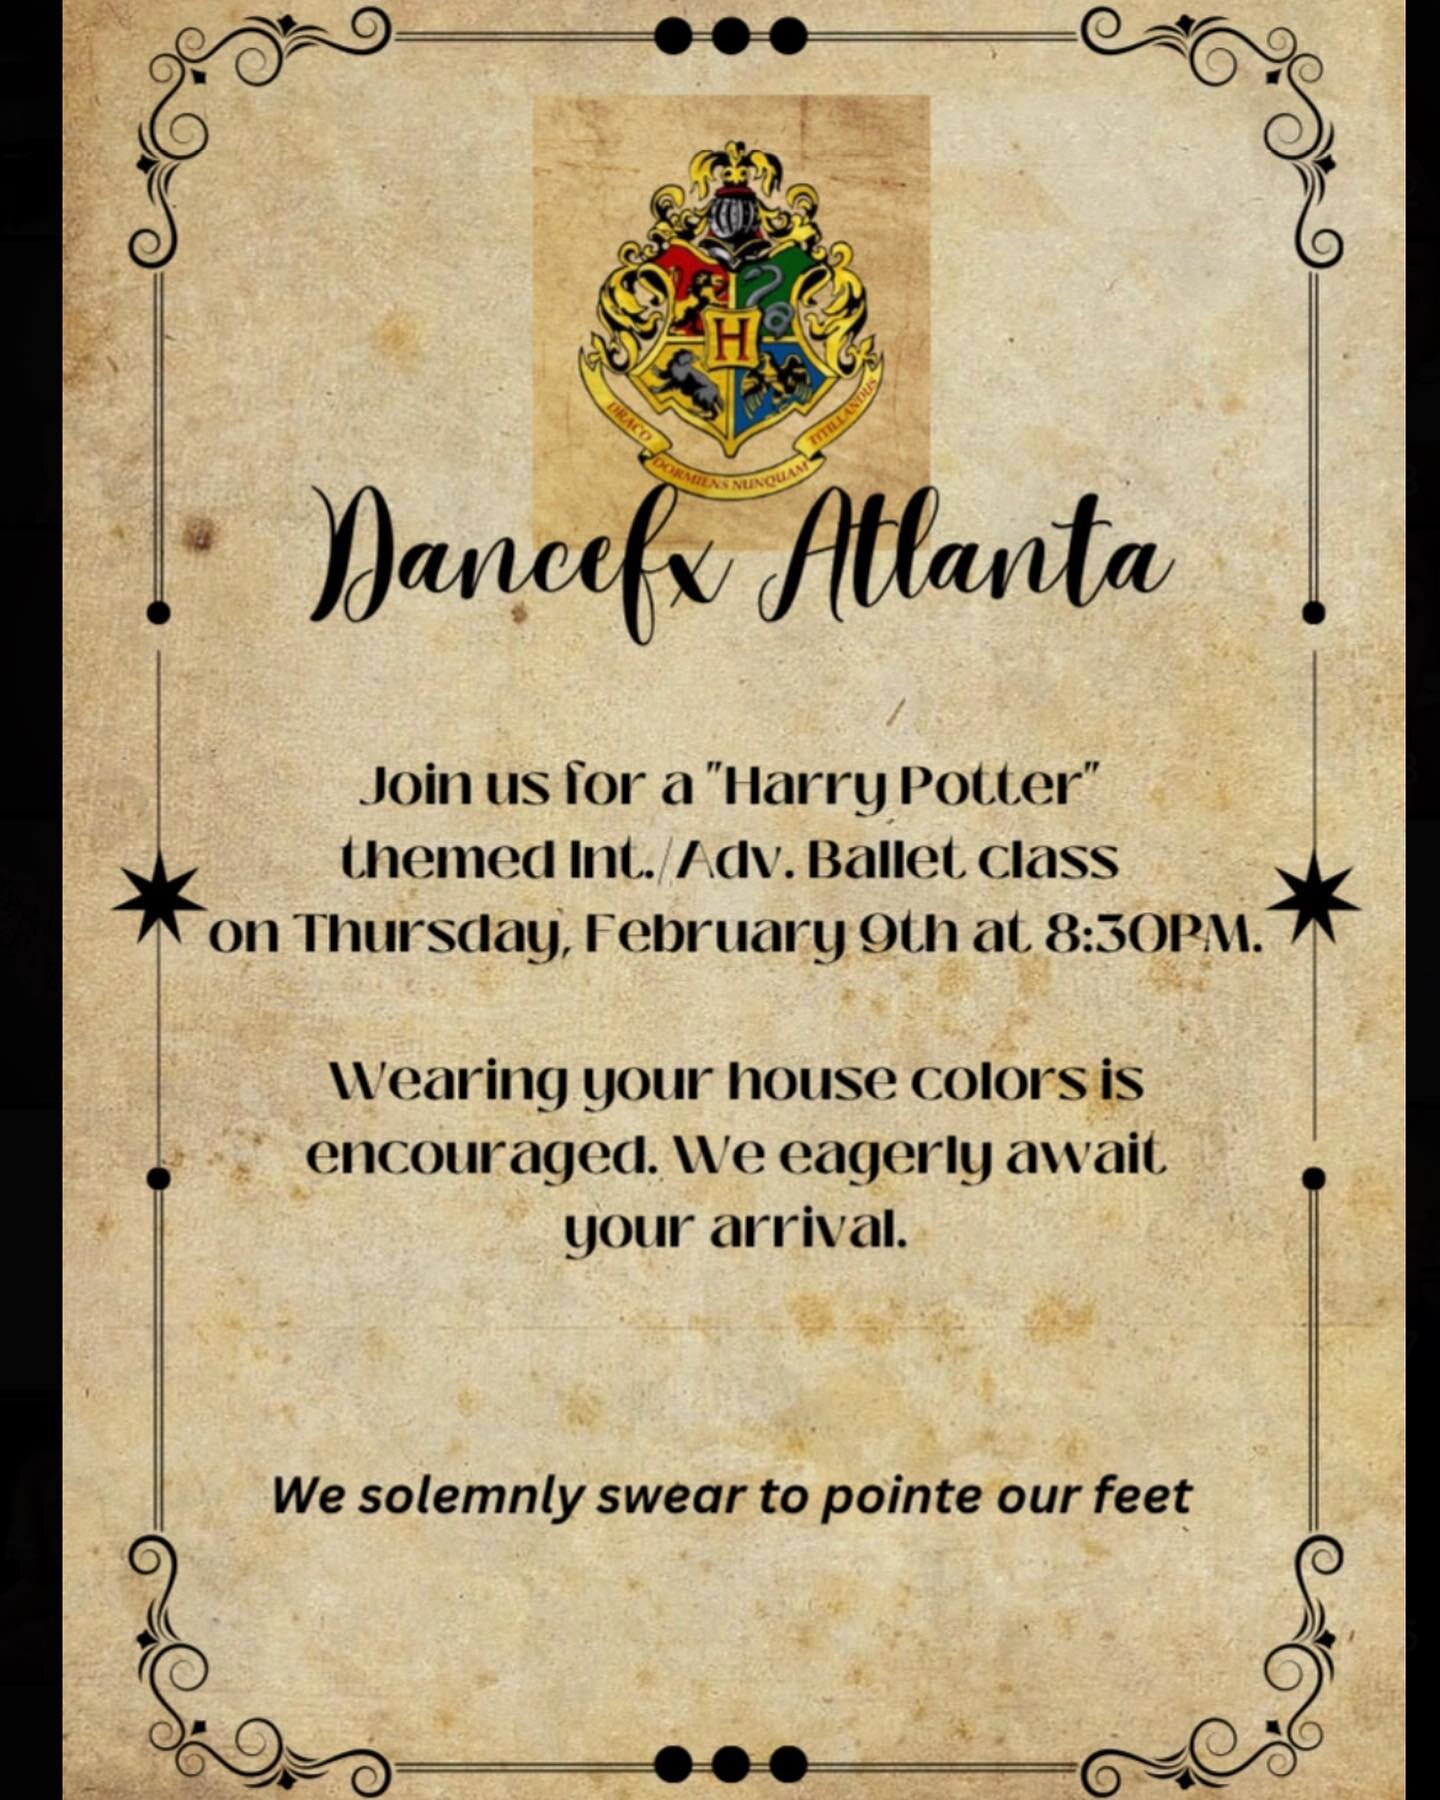 We are pleased to inform you that you have a place at Dancefx Atlanta&rsquo;s Thursday 8:30 PM Int/Adv ballet class, where you will be transported to the Wizarding World!

On Thursday, February 9th, you may sport your house colors to ballet and join 